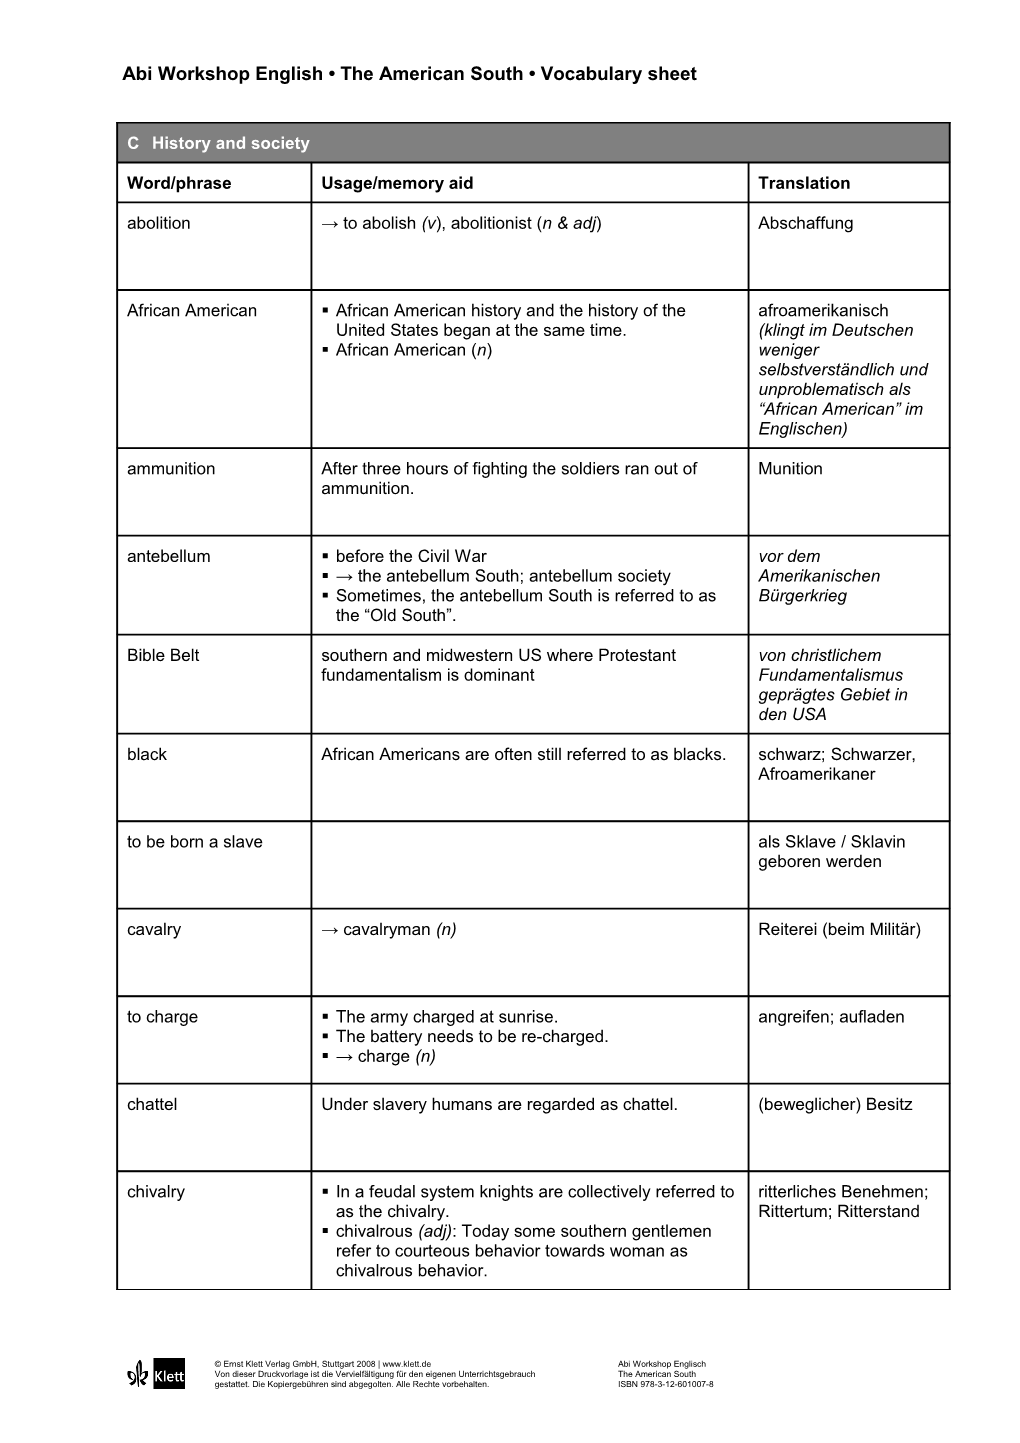 Abi Workshop English the American South Vocabulary Sheet